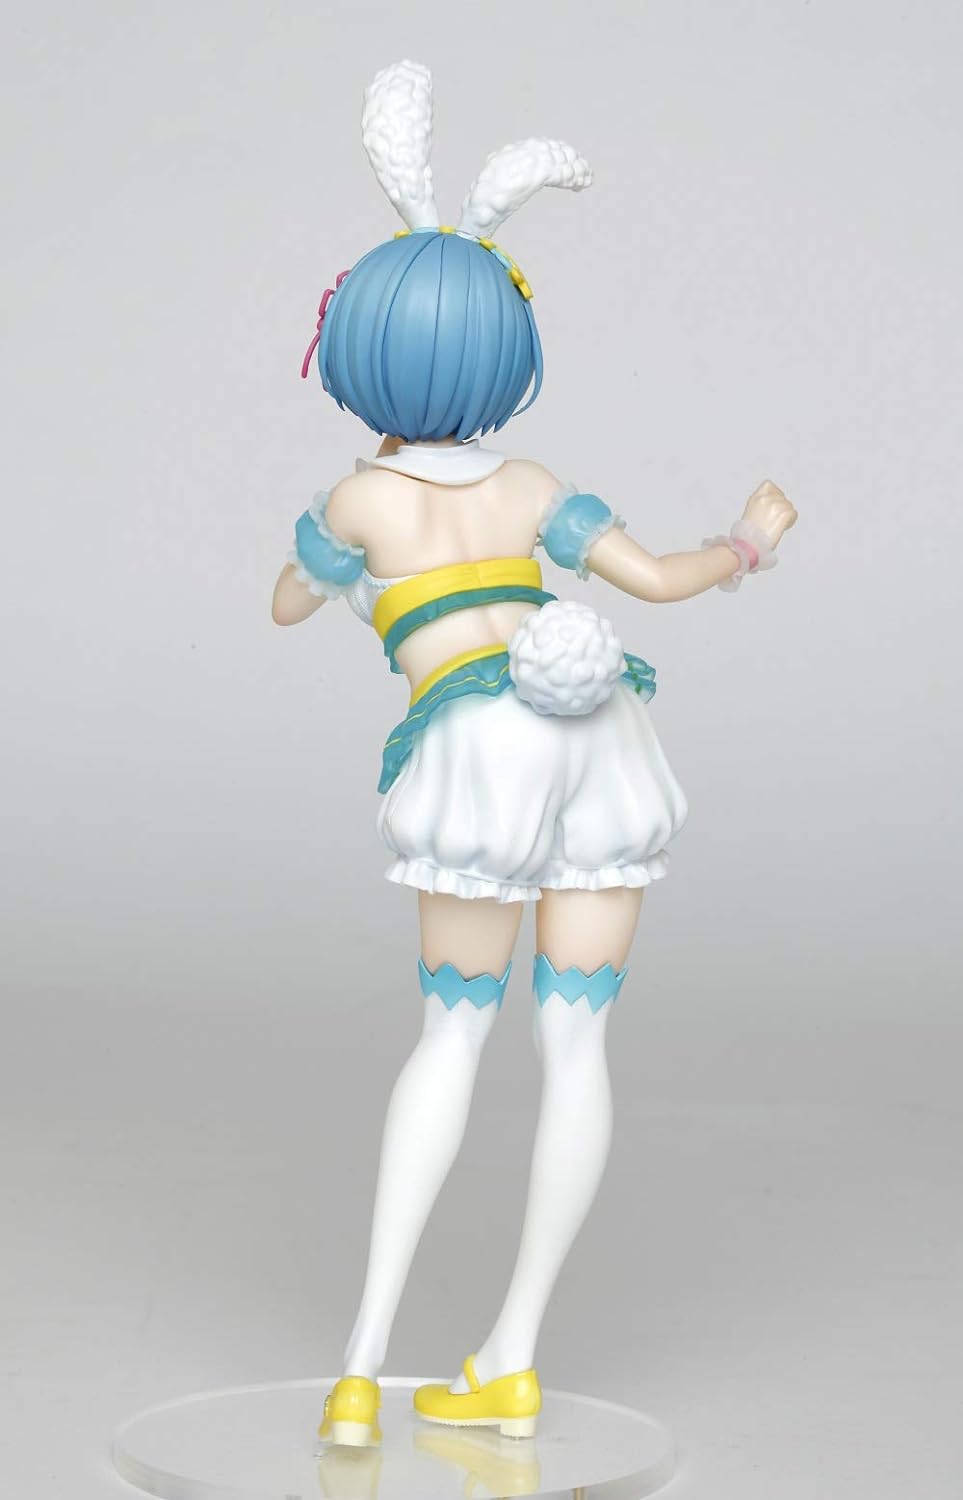 Re:Zero - Starting Life in Another World - Precious Figures - Rem - Happy Easter! Ver. | animota